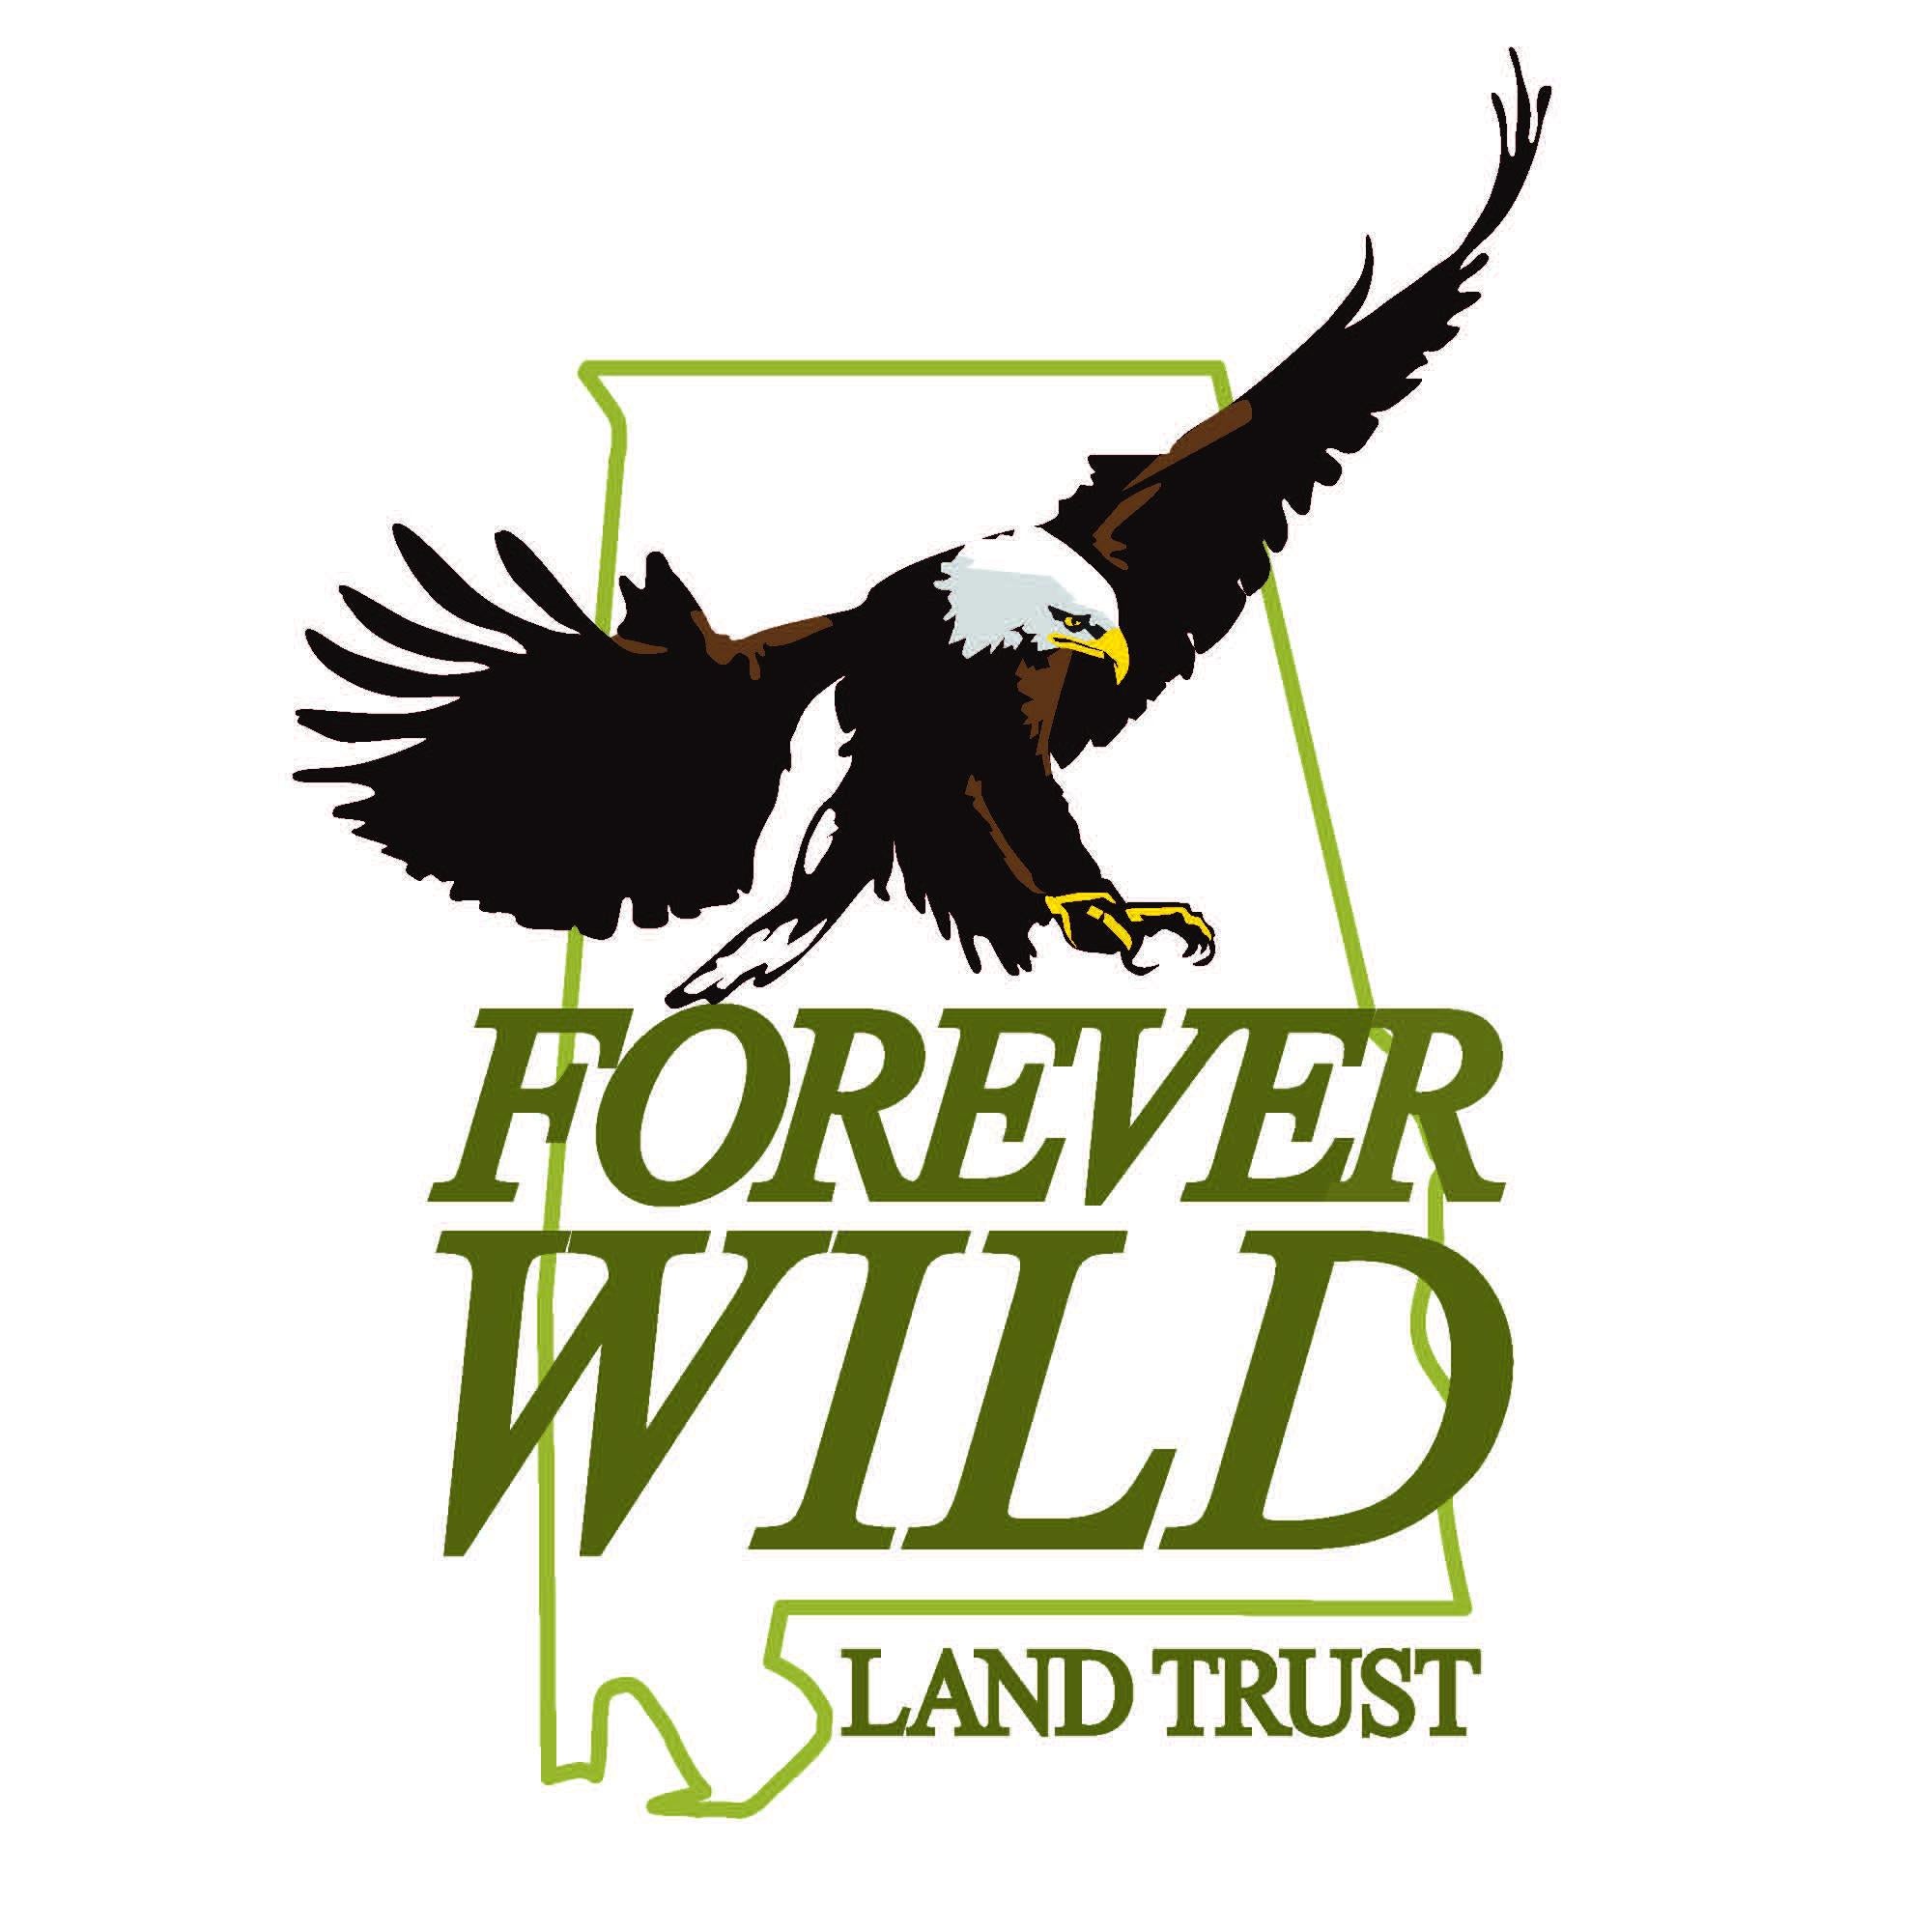 Forever Wild Board Meets in Montgomery on February 3